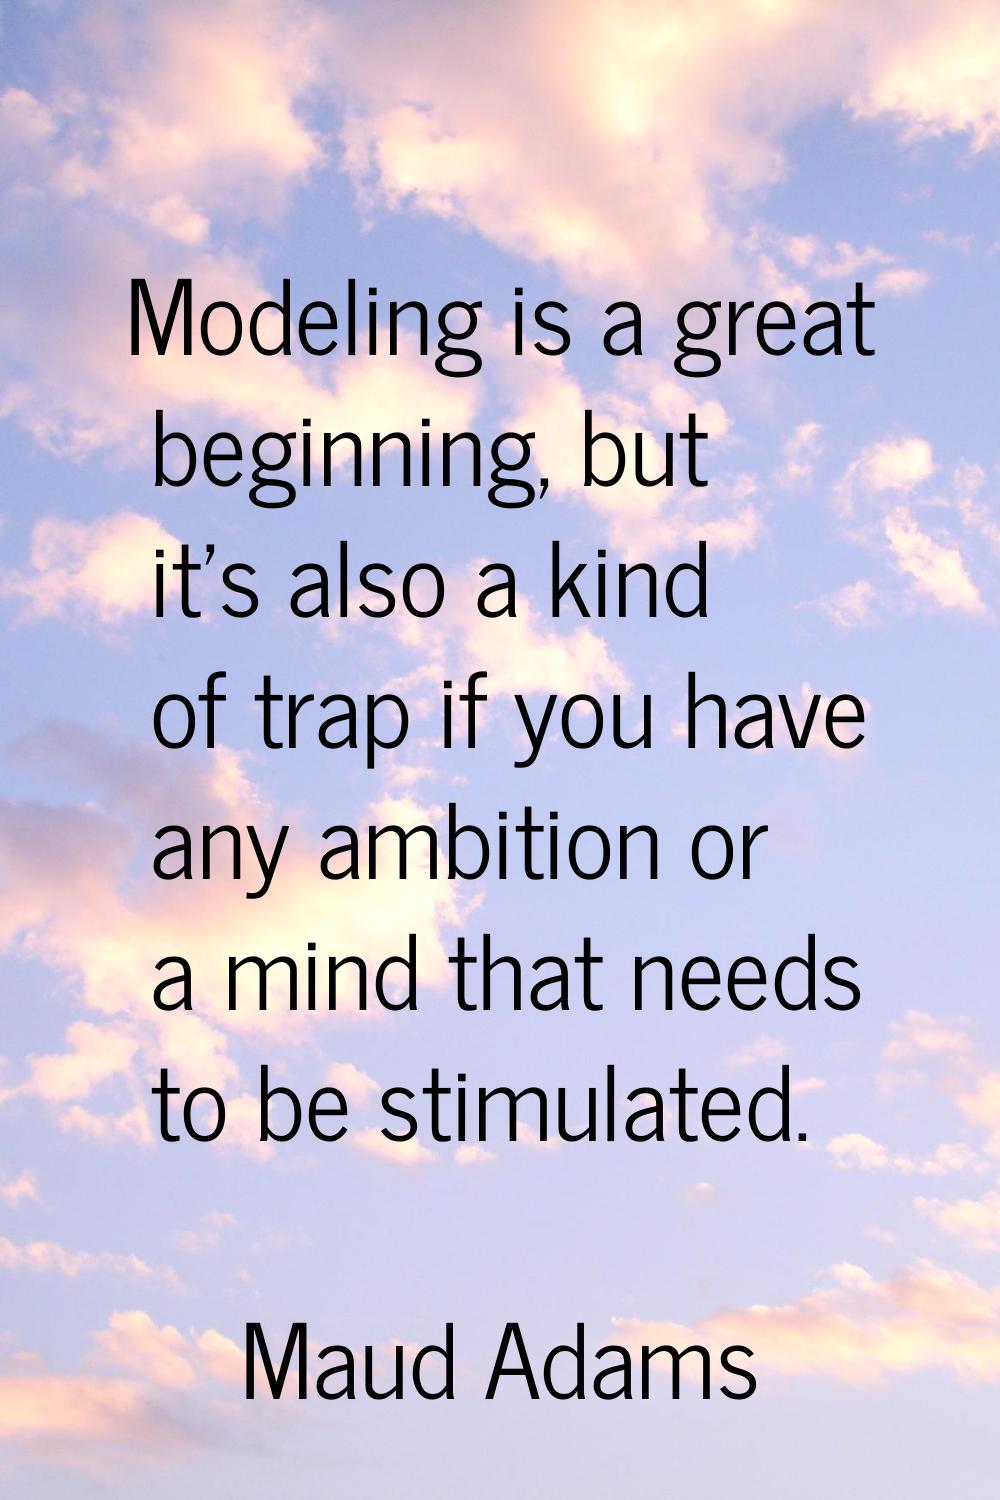 Modeling is a great beginning, but it's also a kind of trap if you have any ambition or a mind that